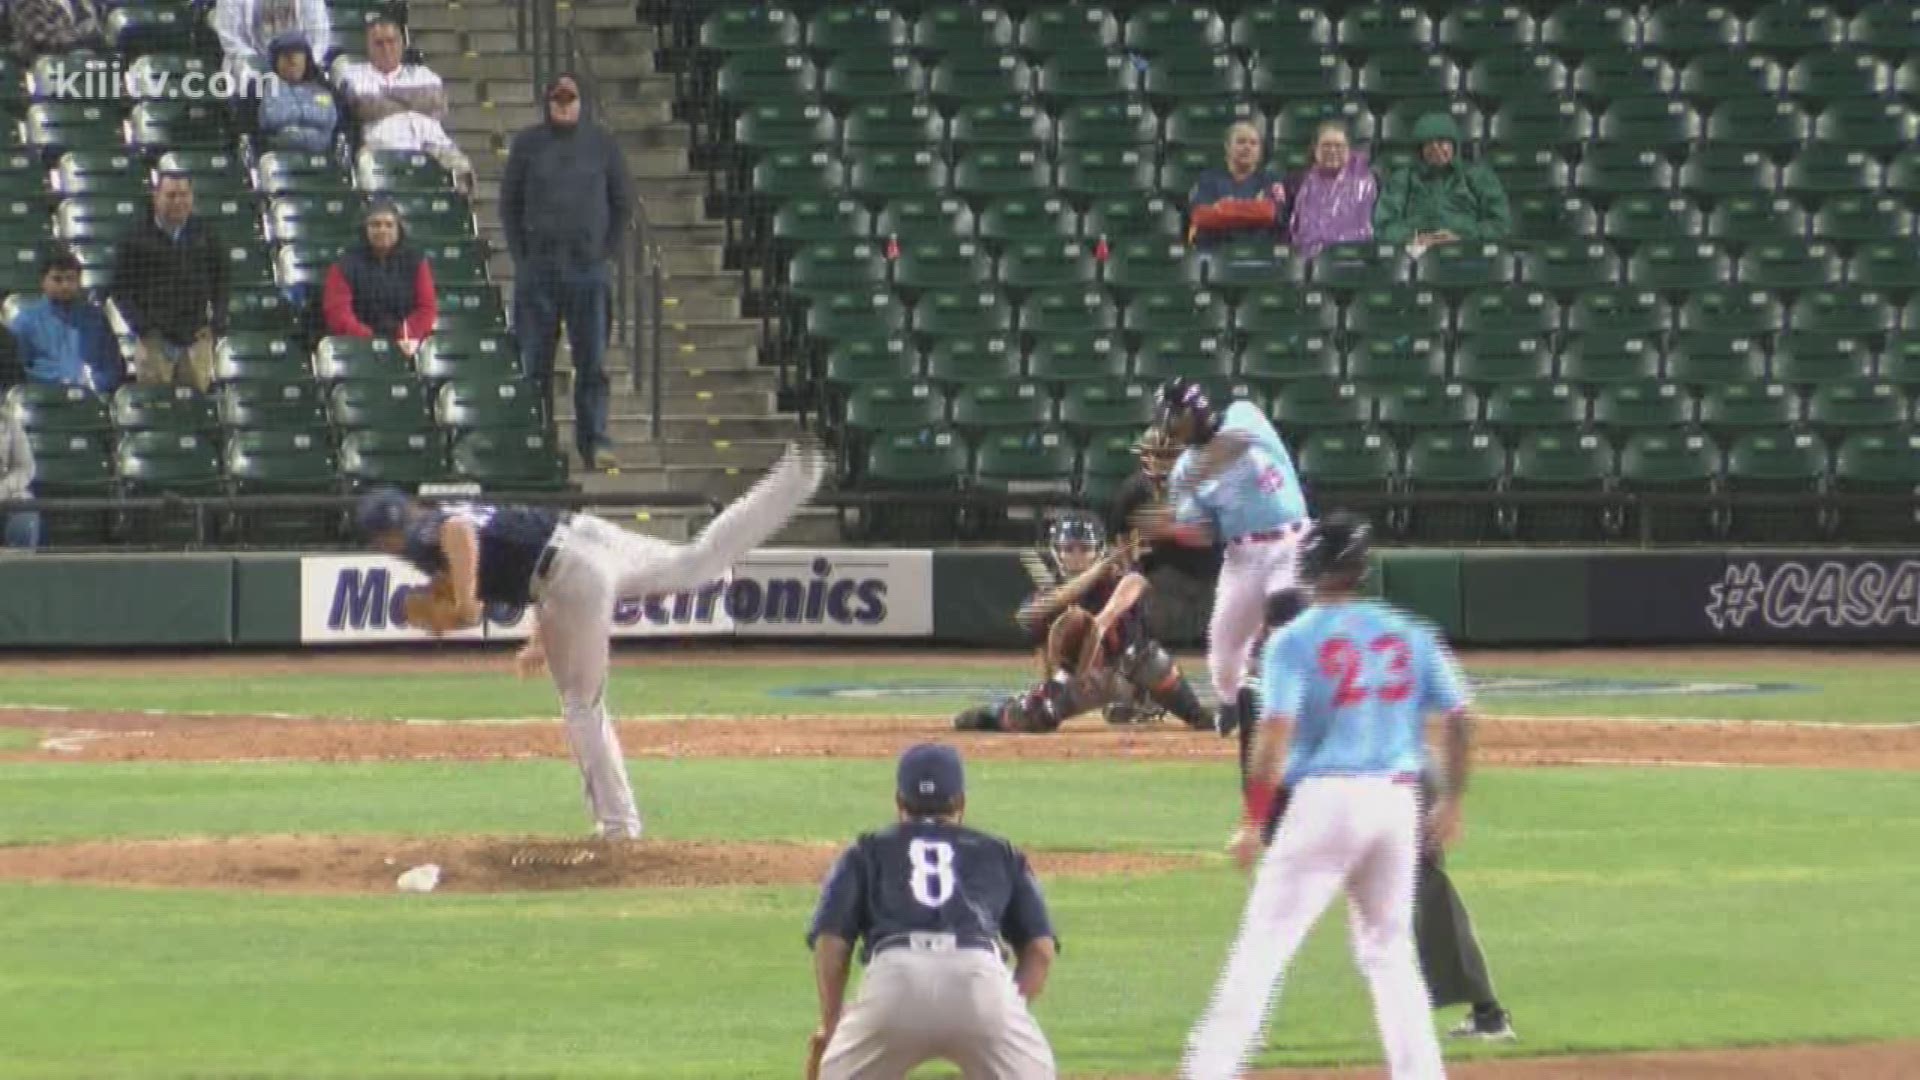 The Corpus Christi Hooks played at Whataburger Field for the first time in 2019 and did not disappoint with a 2-1 win over the Round Rock Express in an exhibition game.